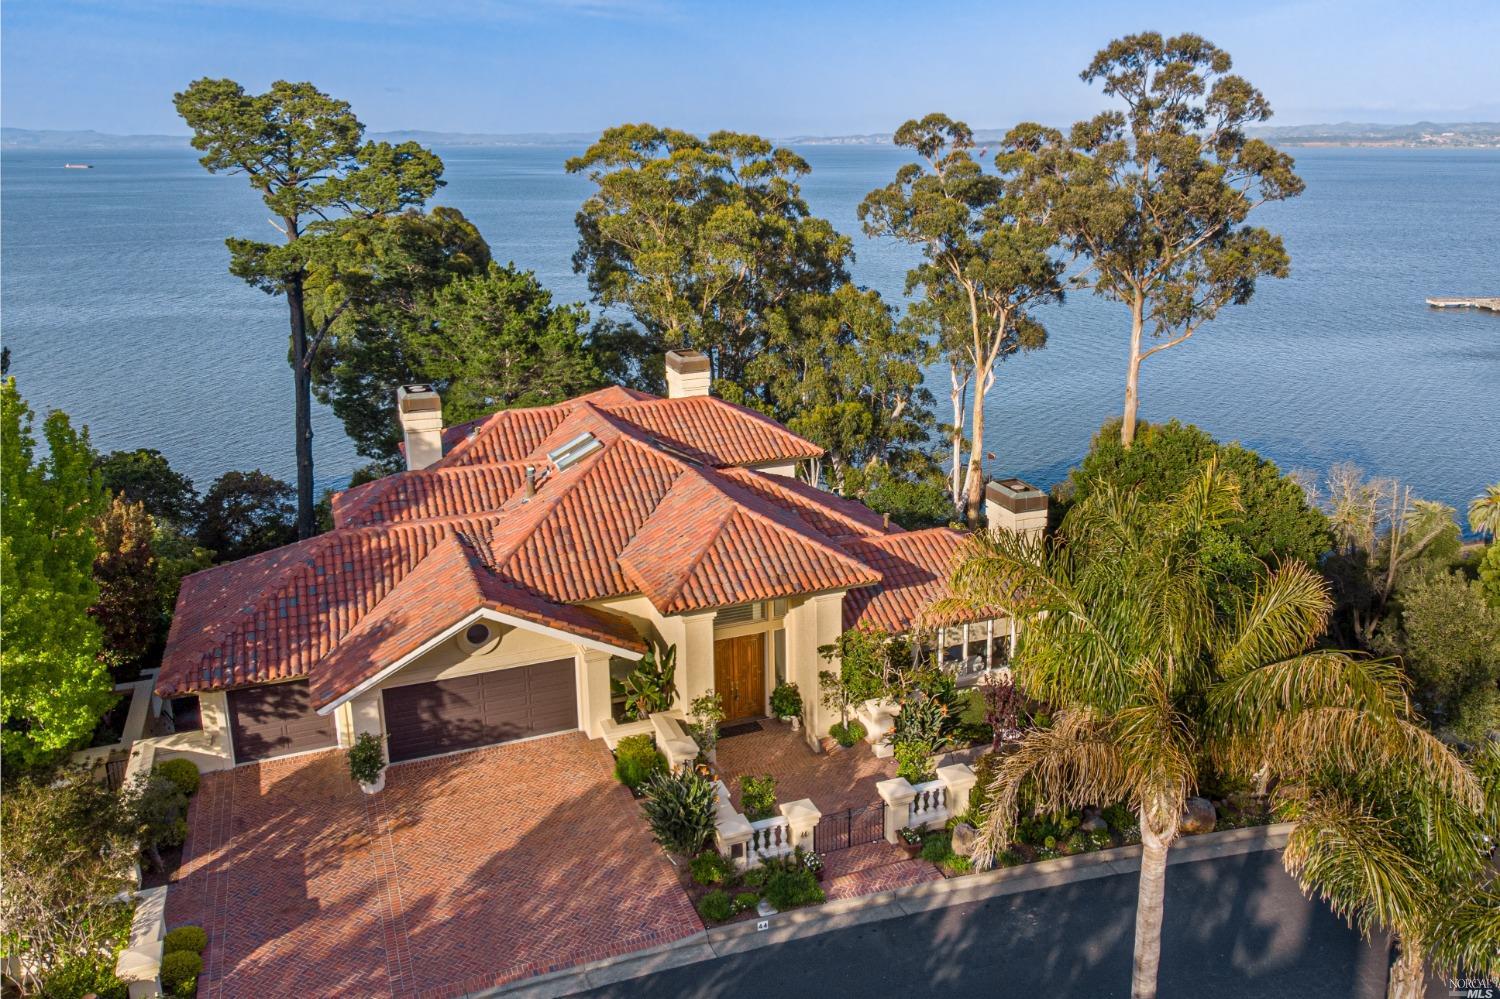 As you enter 44 Marin Bay Court, be carried away to the finest seaside European Villa! Breathtaking bayfront vistas surrounded by gardens and natural habitat are the private setting for the 5 bedroom, 5 bath 5560 square foot residence. Fine building and sense of scale are seen in the soaring ceilings, wonderful natural light, deep moldings, elegant hardwoods and marble floors. The current owner has enhanced the home with custom design elements inside and out: curated lighting, remodeled kitchen, custom window coverings, hot tub, fire pit, outdoor BBQ, the list goes on. The main level is ideal for entertaining, featuring formal and informal rooms plus remodeled chef's kitchen, all flow to outside terrace for dining alfresco. The spacious primary suite is a romantic private oasis. The wood paneled library, media room and guest rooms-ensuite with private baths also feature terrace access to the spa overlooking the sea. Experience the timeless elegance and exceptional craftsmanship at this unparalleled estate.